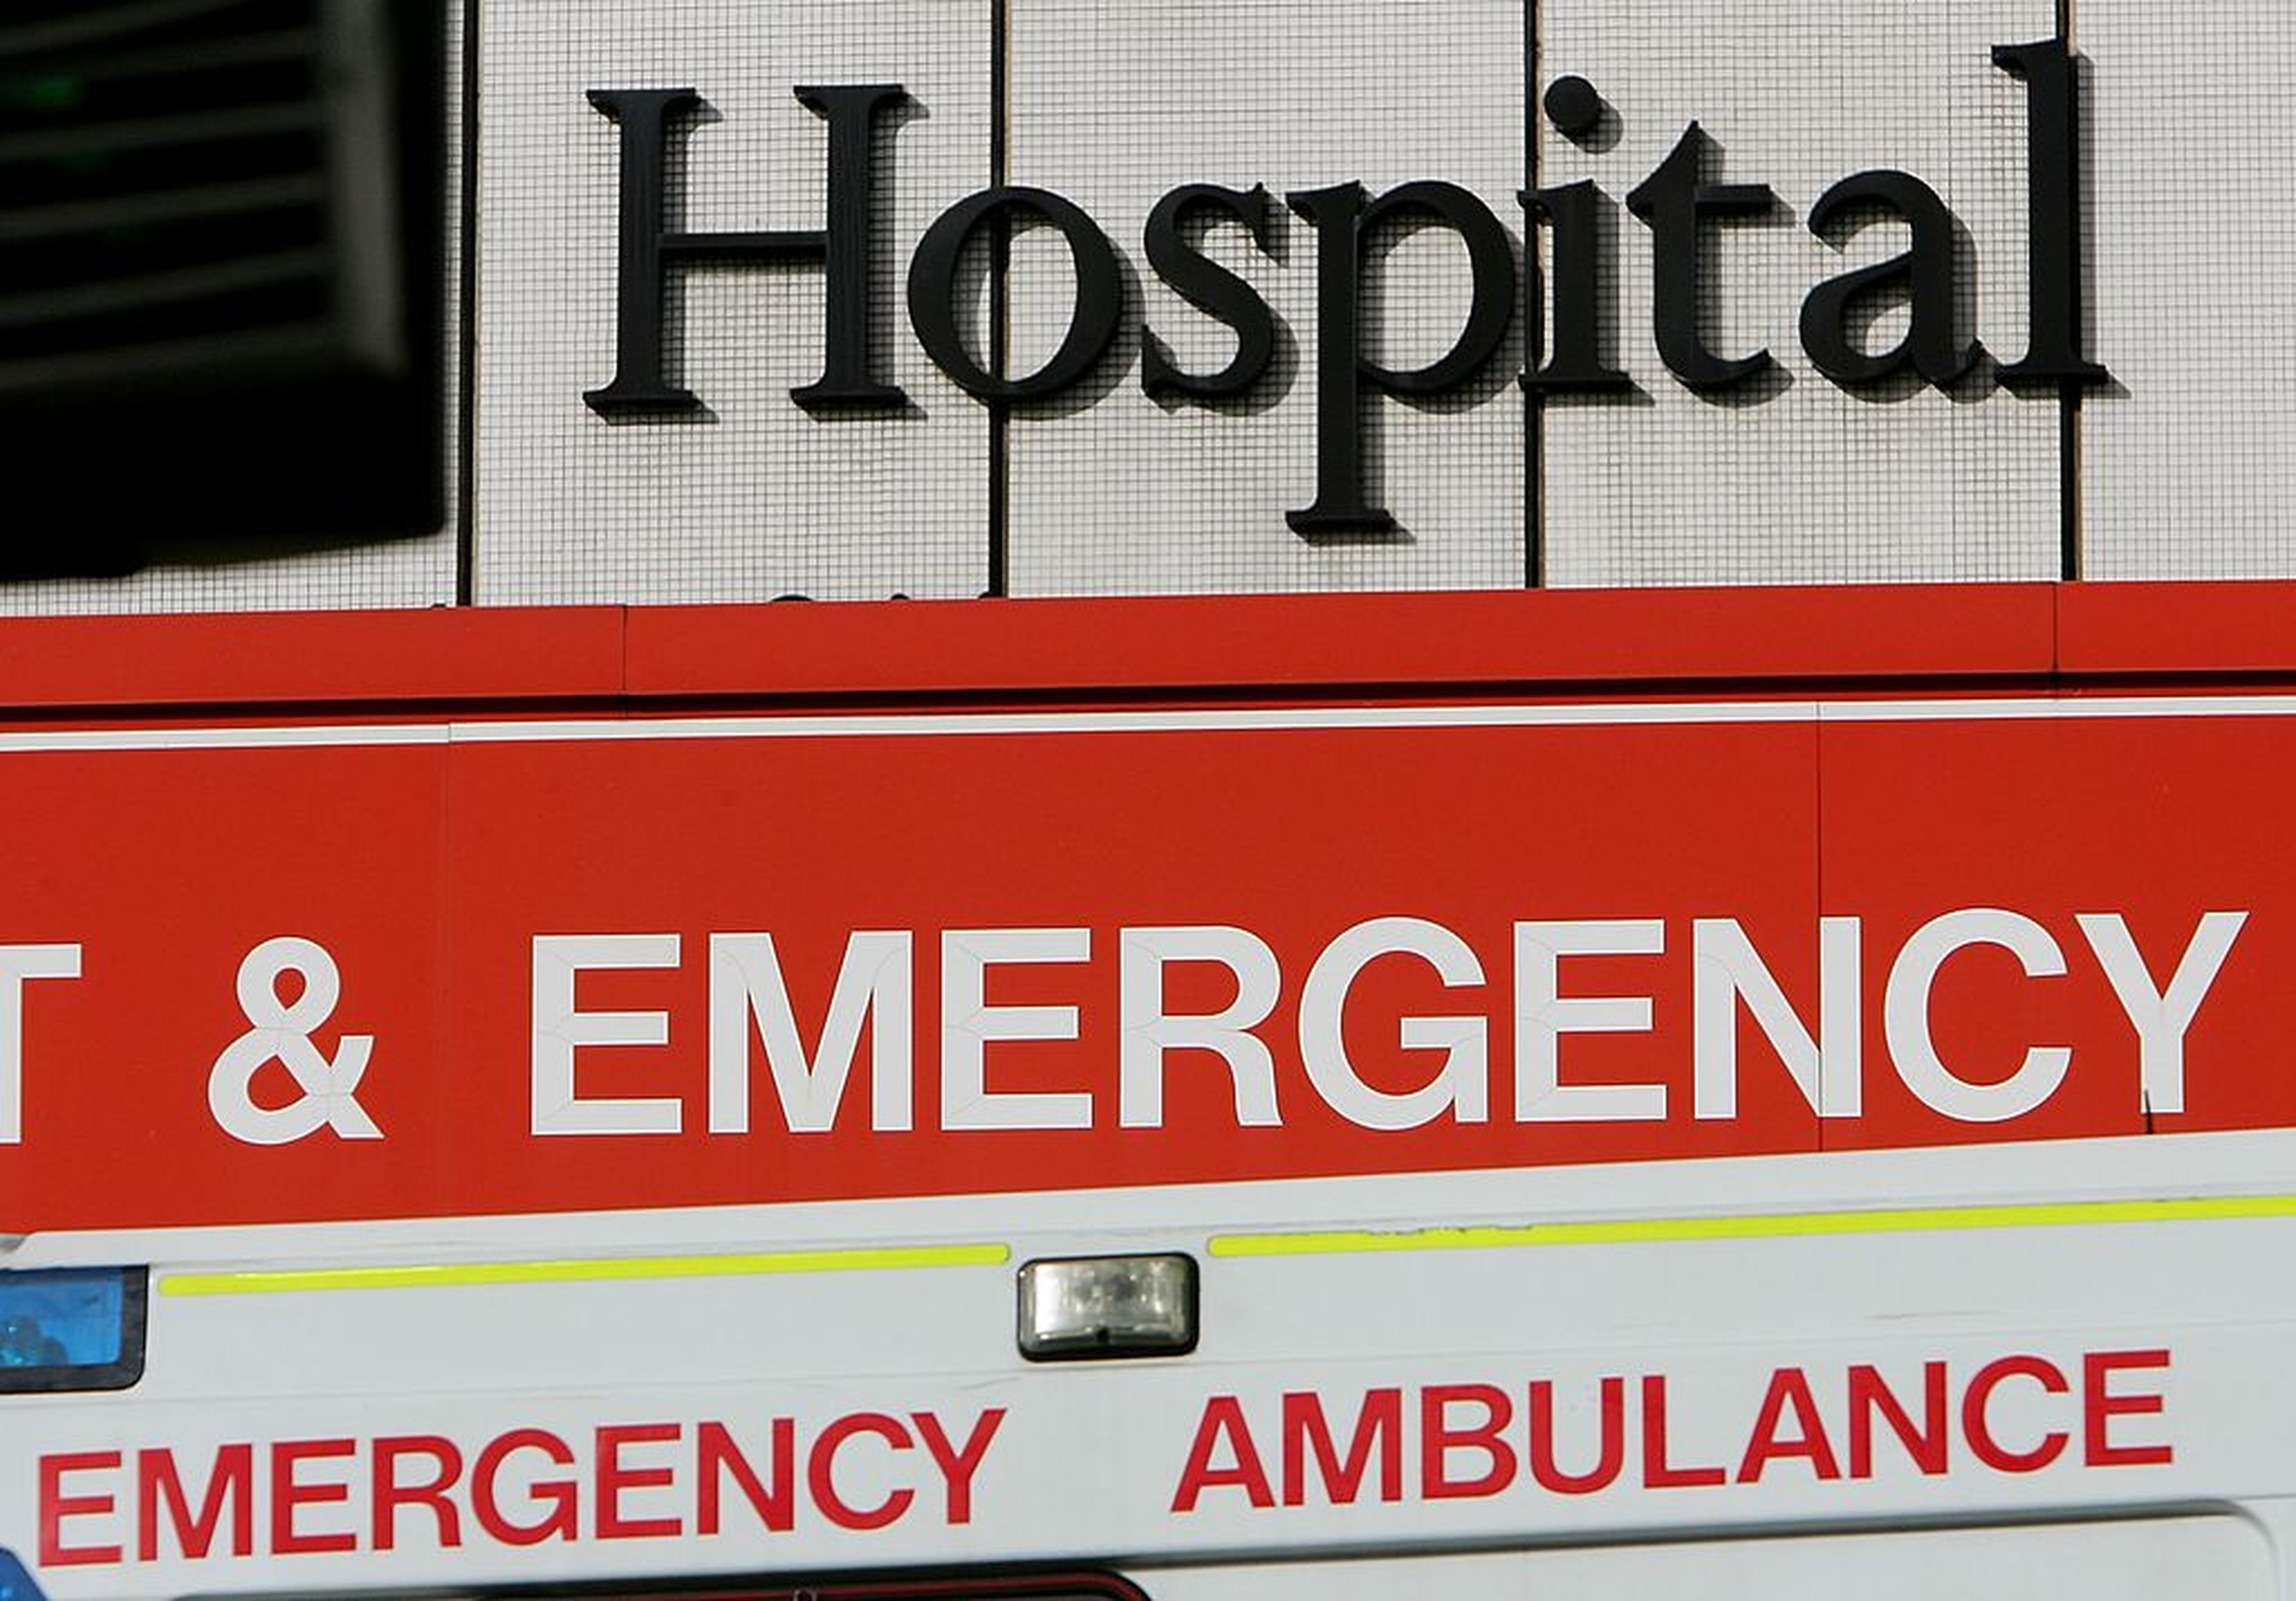 Network outages and service disruptions have become a prevalent fallout from cyberattacks in healthcare. After the Kronos incident, providers must evaluate how to maintain business continuity. (Photo by Cate Gillon/Getty Images)